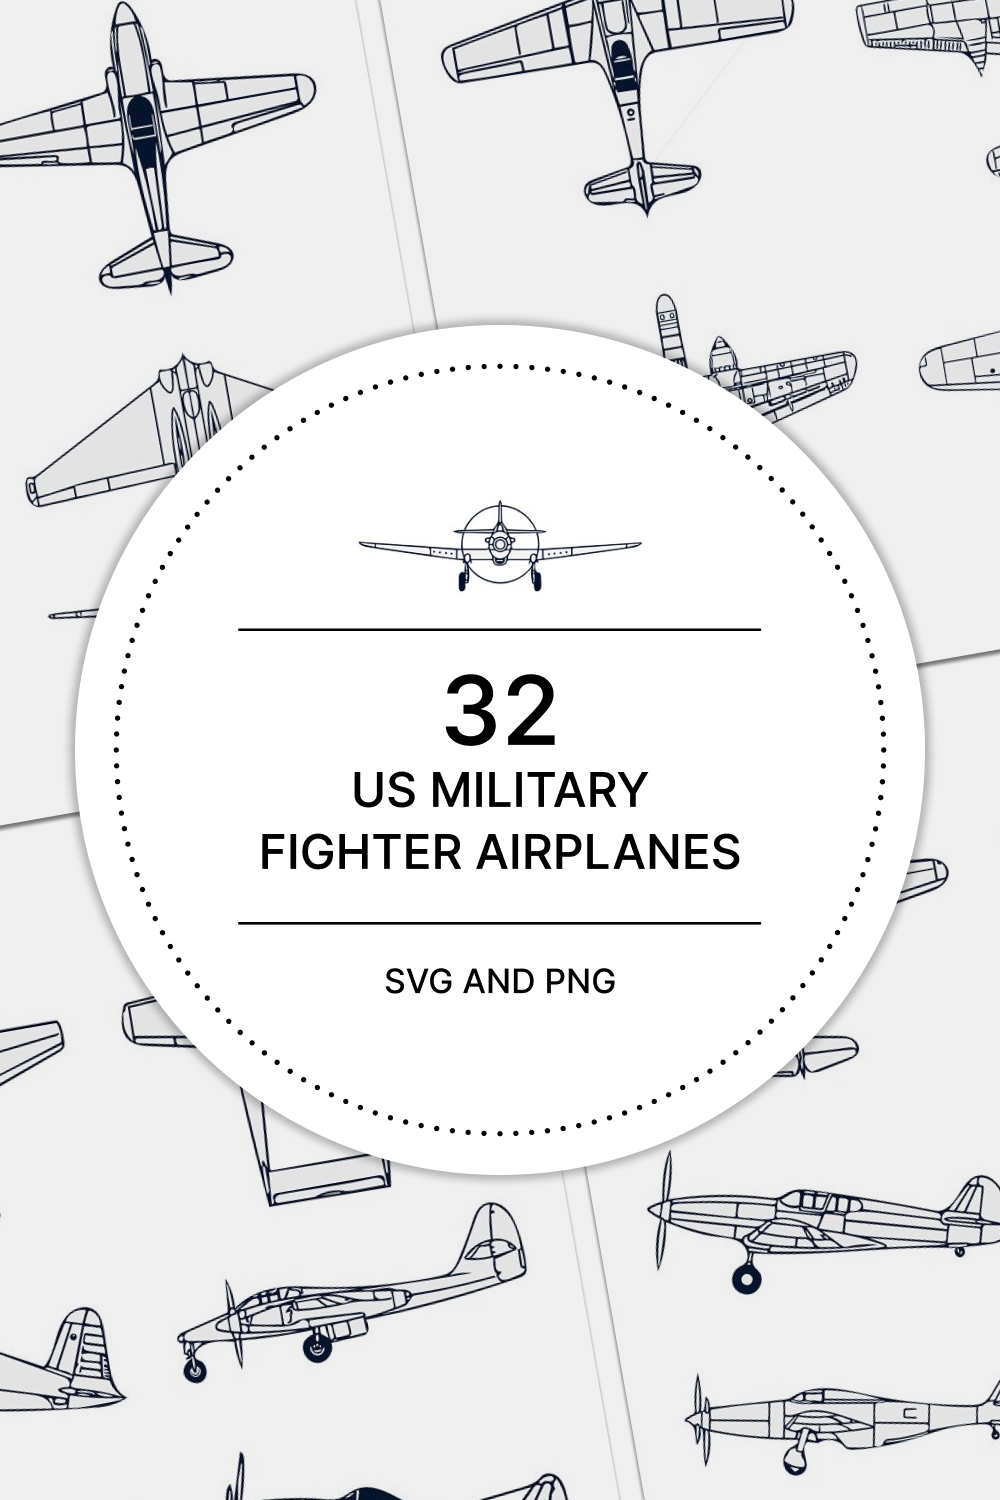 32 us military fighter airplanes 02 78